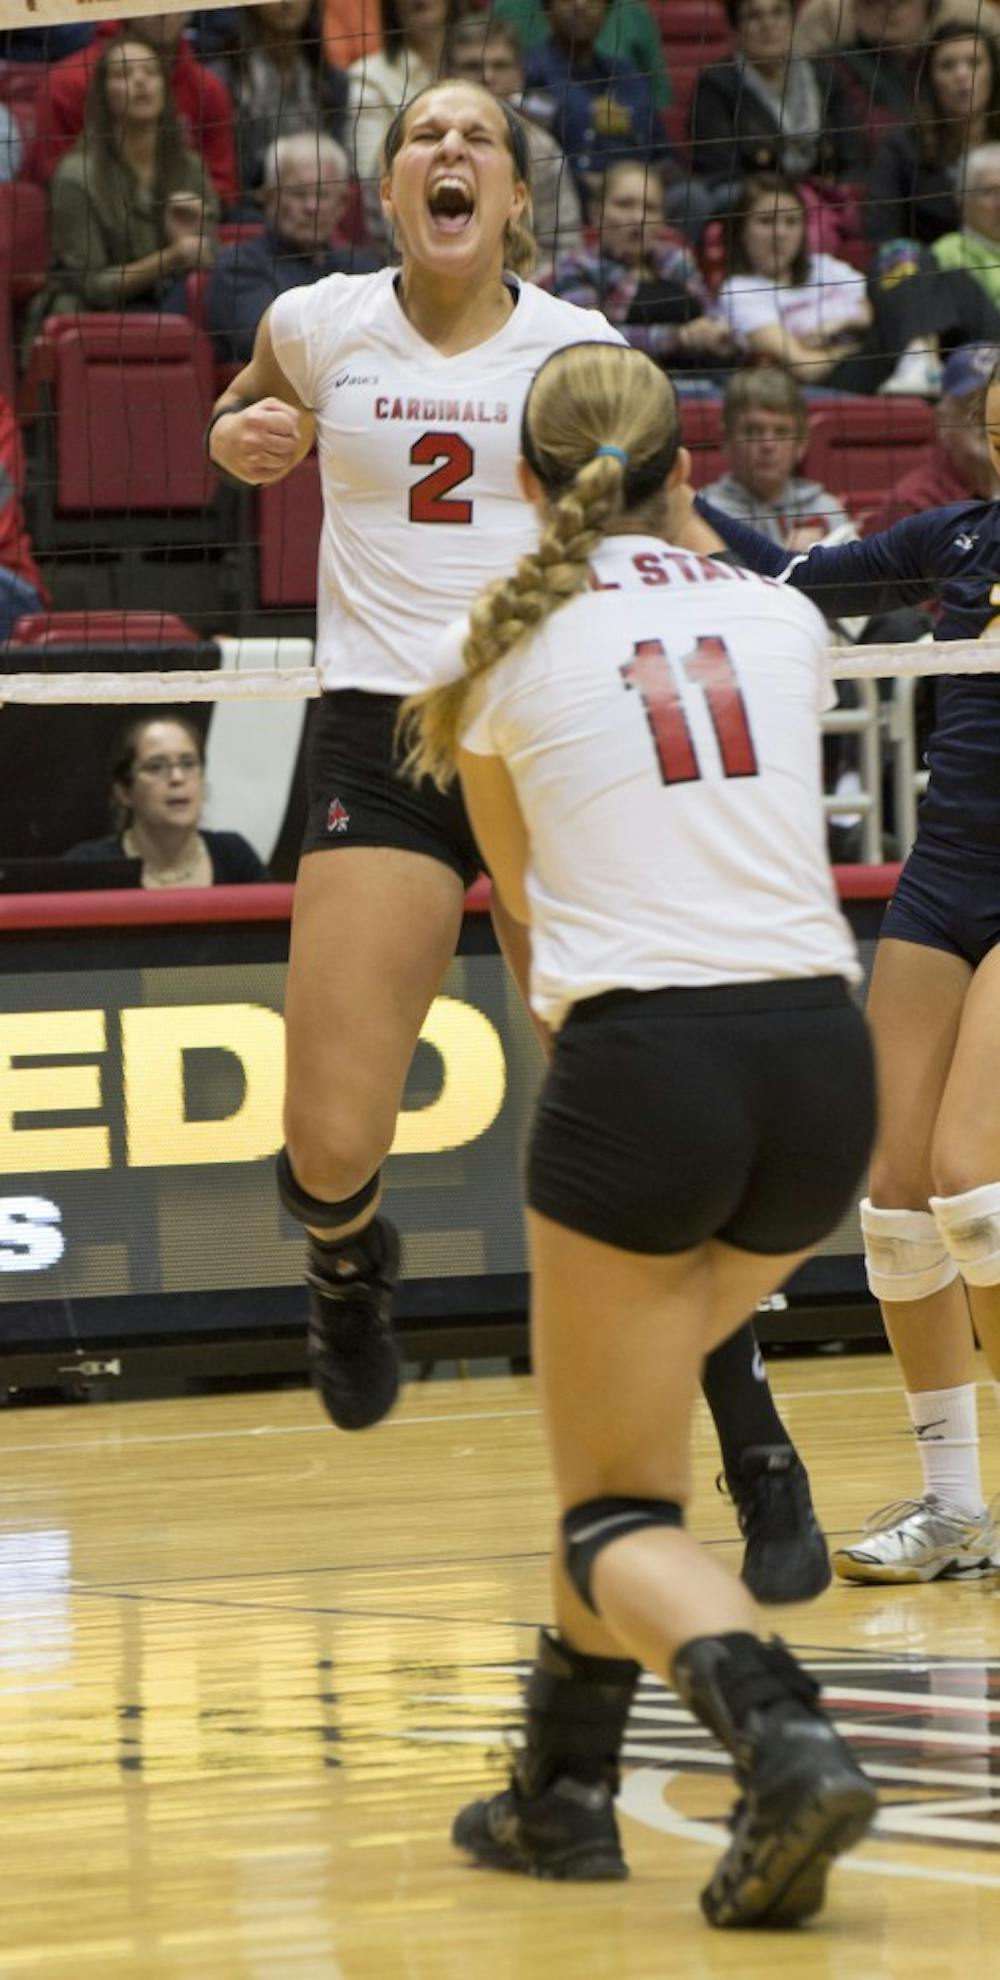 Sophomore outside hitter Alex Fuelling and senior setter Jacqui Seidel celebrate after getting a point at the match against the University of Toledo on Nov. 7 at Worthen Arena. DN PHOTO EMILY SOBECKI